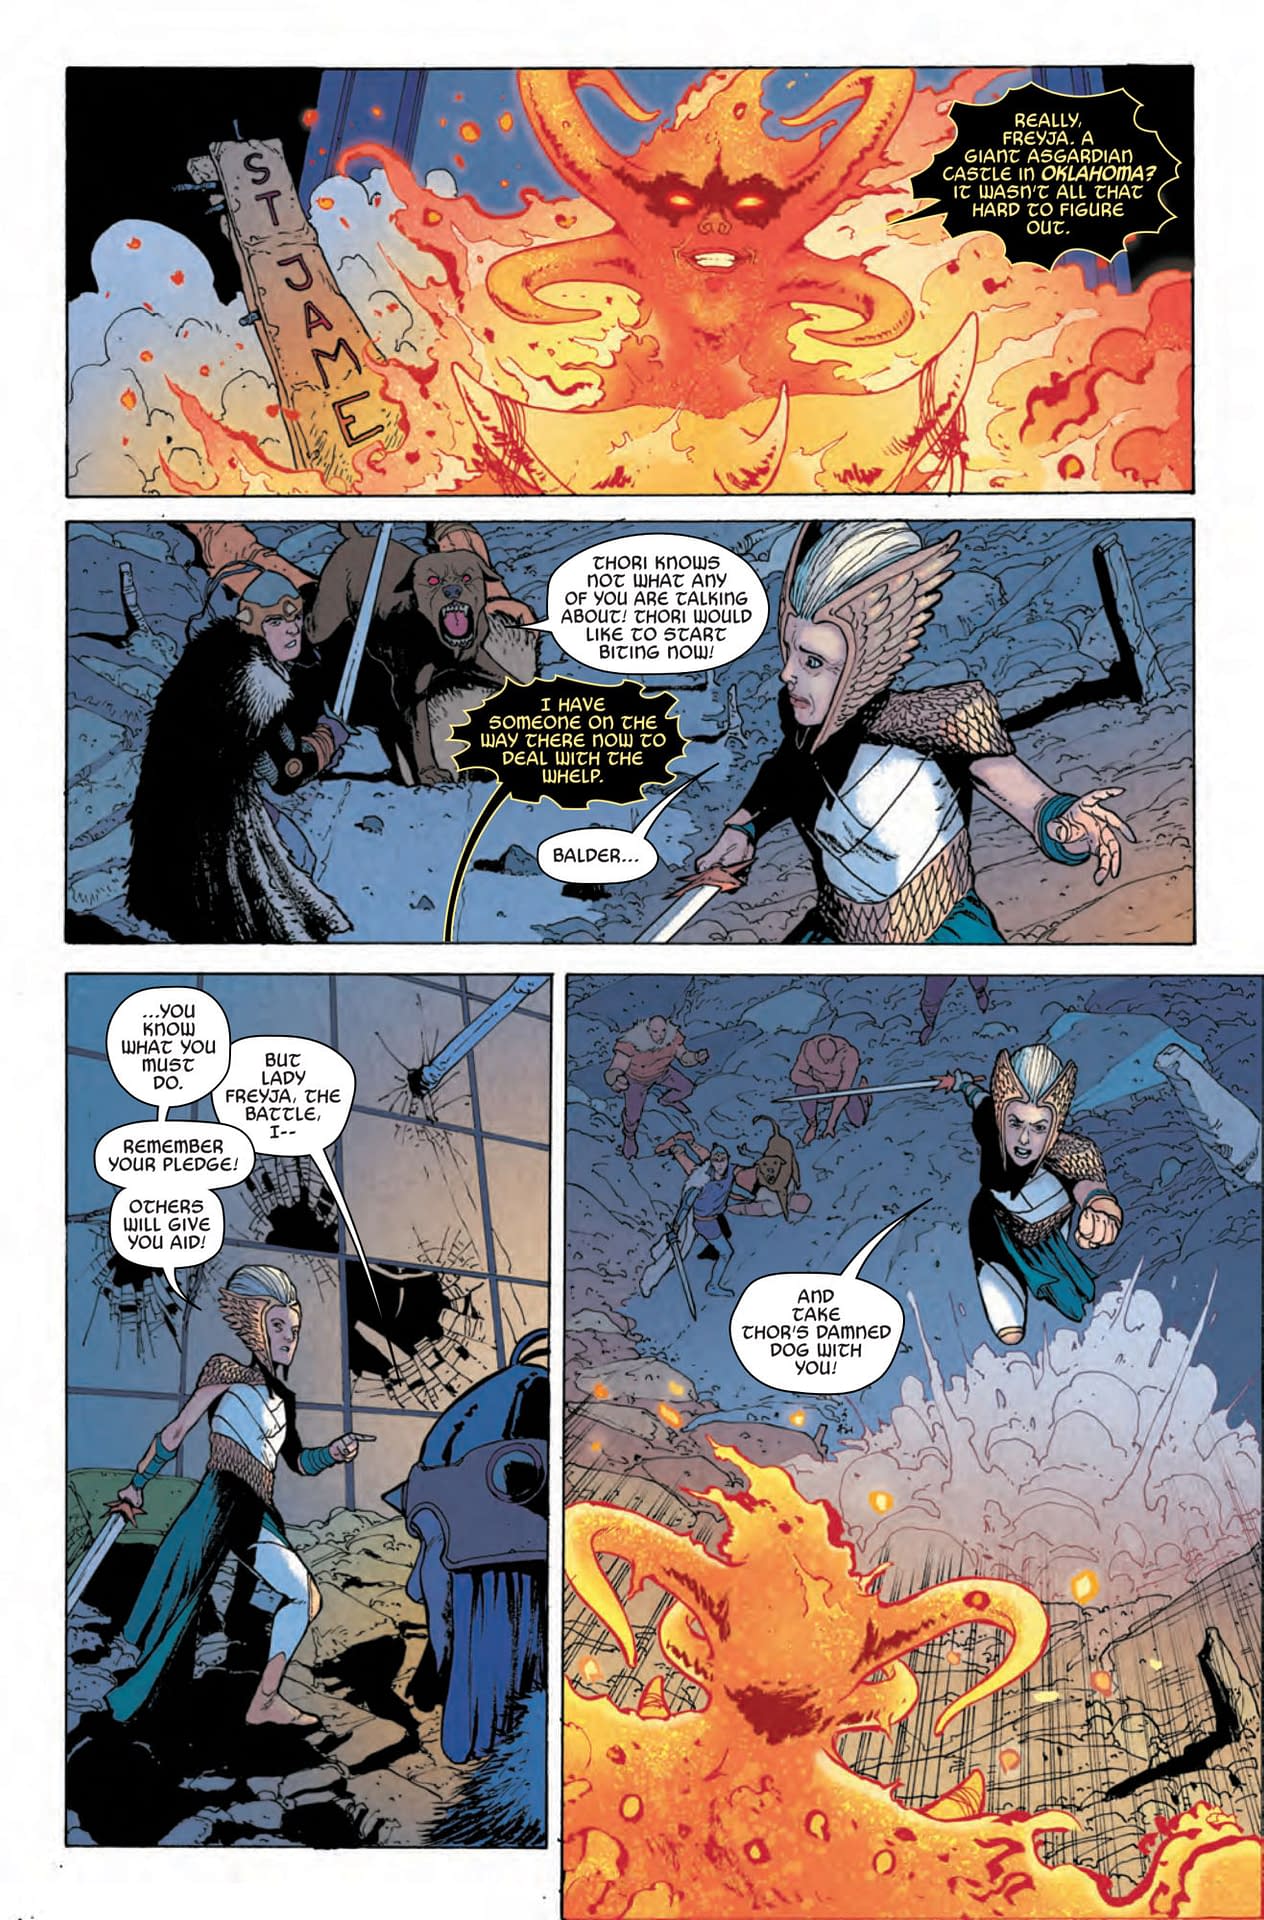 Freya Gives the Sex Talk to Thor and Balder in War of the Realms: Journey Into Mystery #1